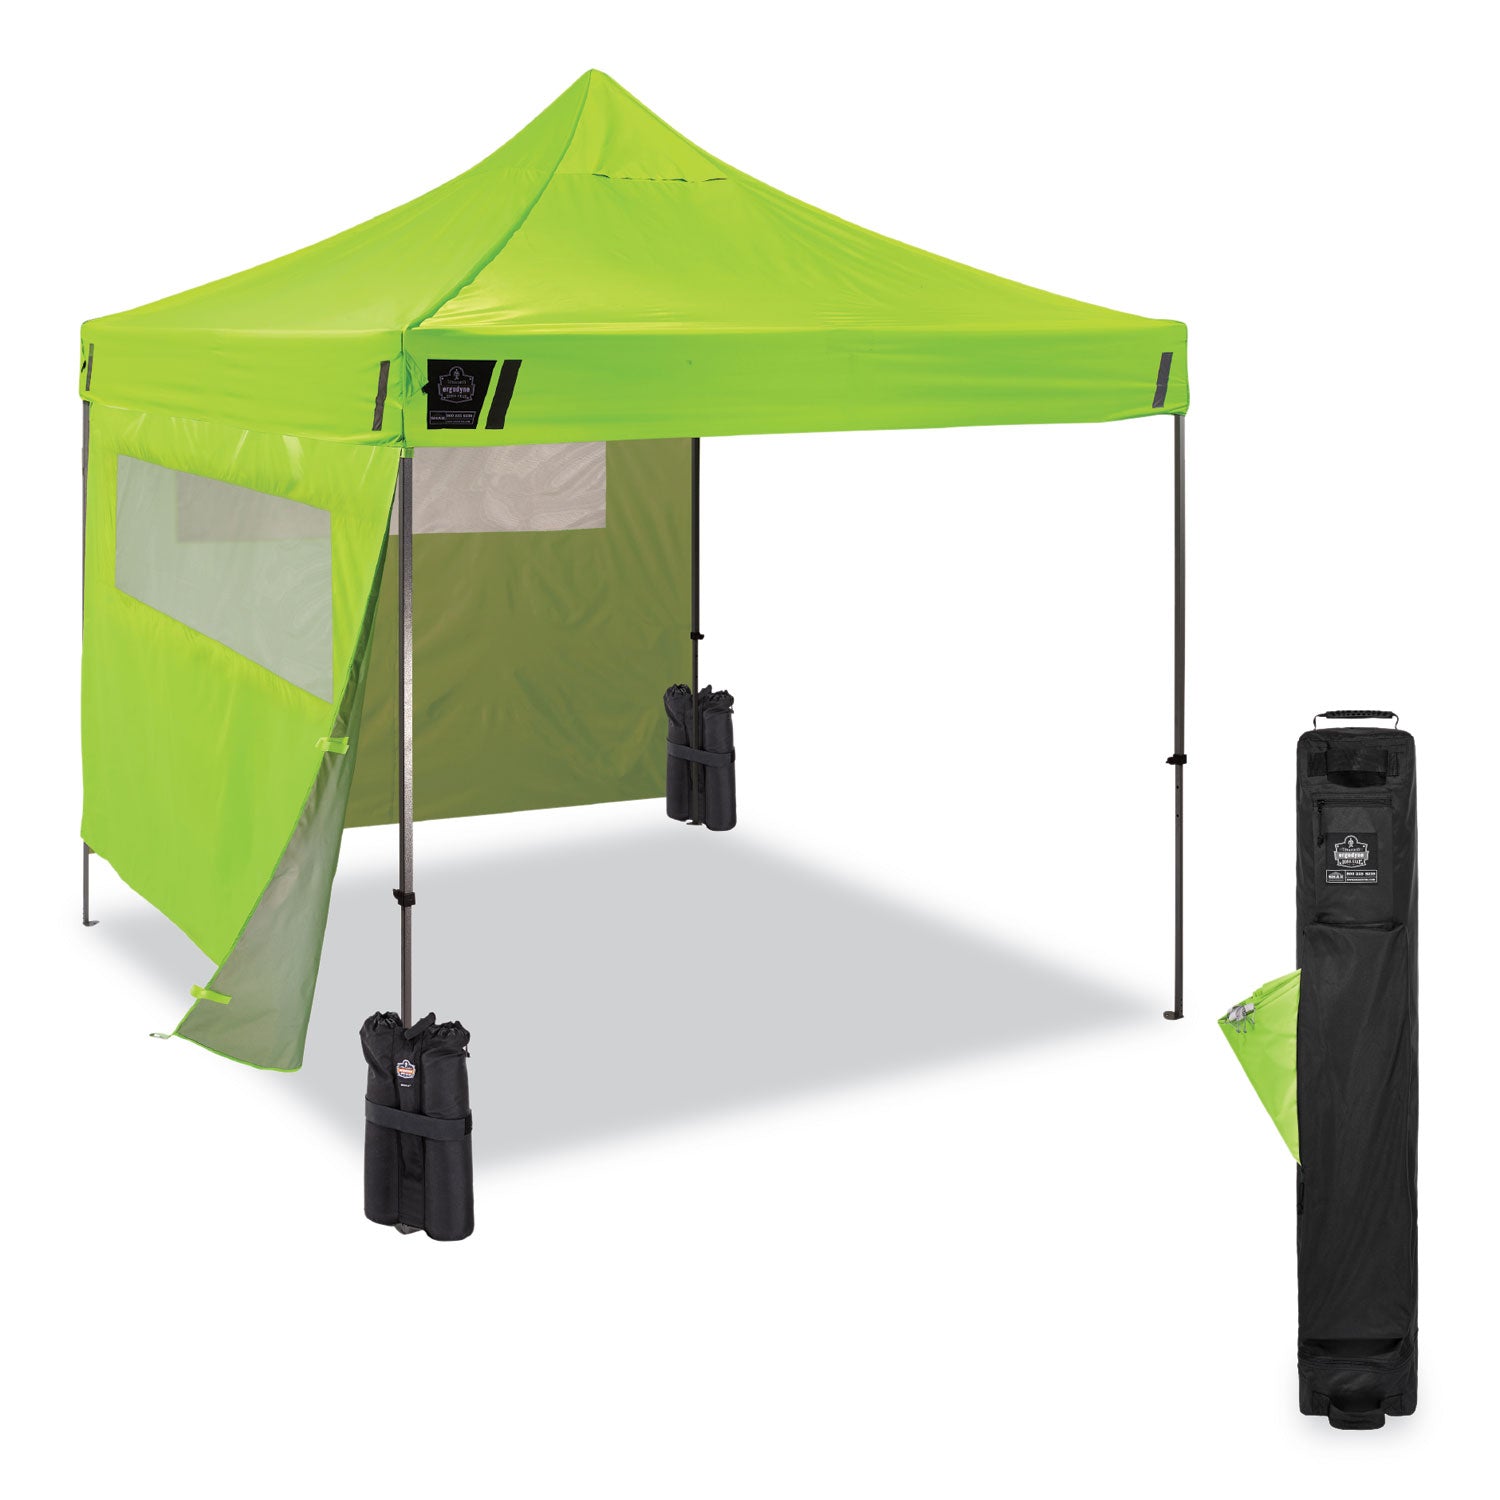 shax-6052-heavy-duty-tent-kit-+-mesh-windows-single-skin-10-ft-x-10-ft-polyester-steel-lime-ships-in-1-3-business-days_ego12983 - 1